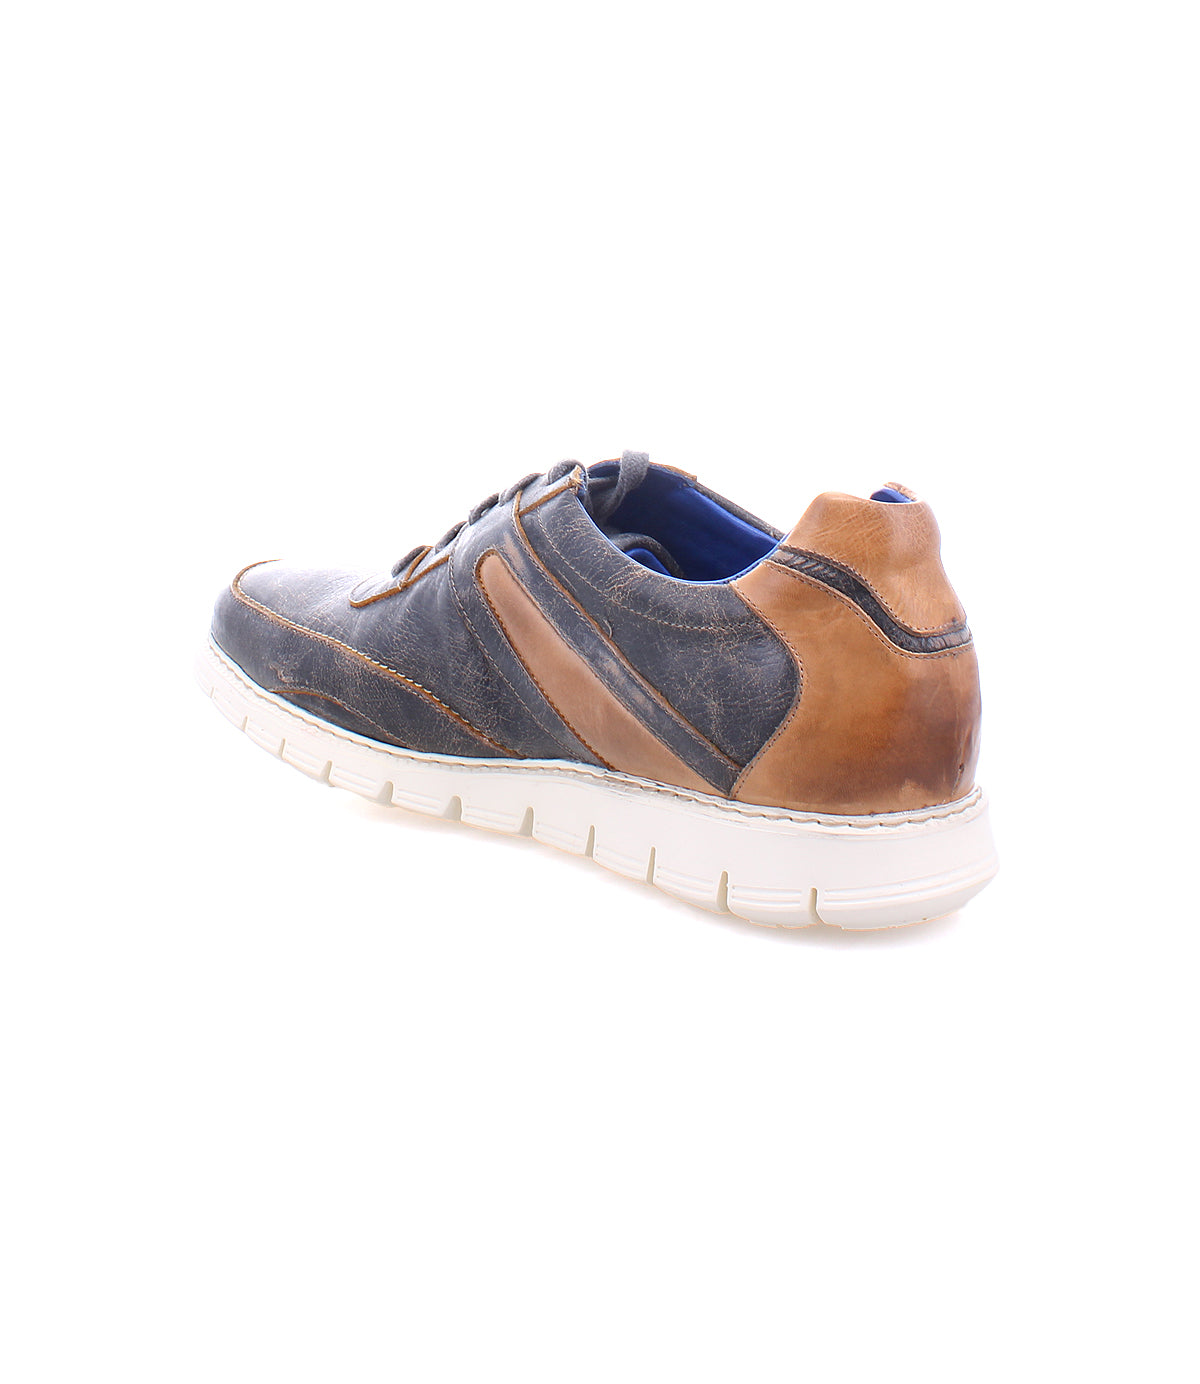 A single Wardell distressed brown and blue leather sneaker with white soles, isolated on a white background.